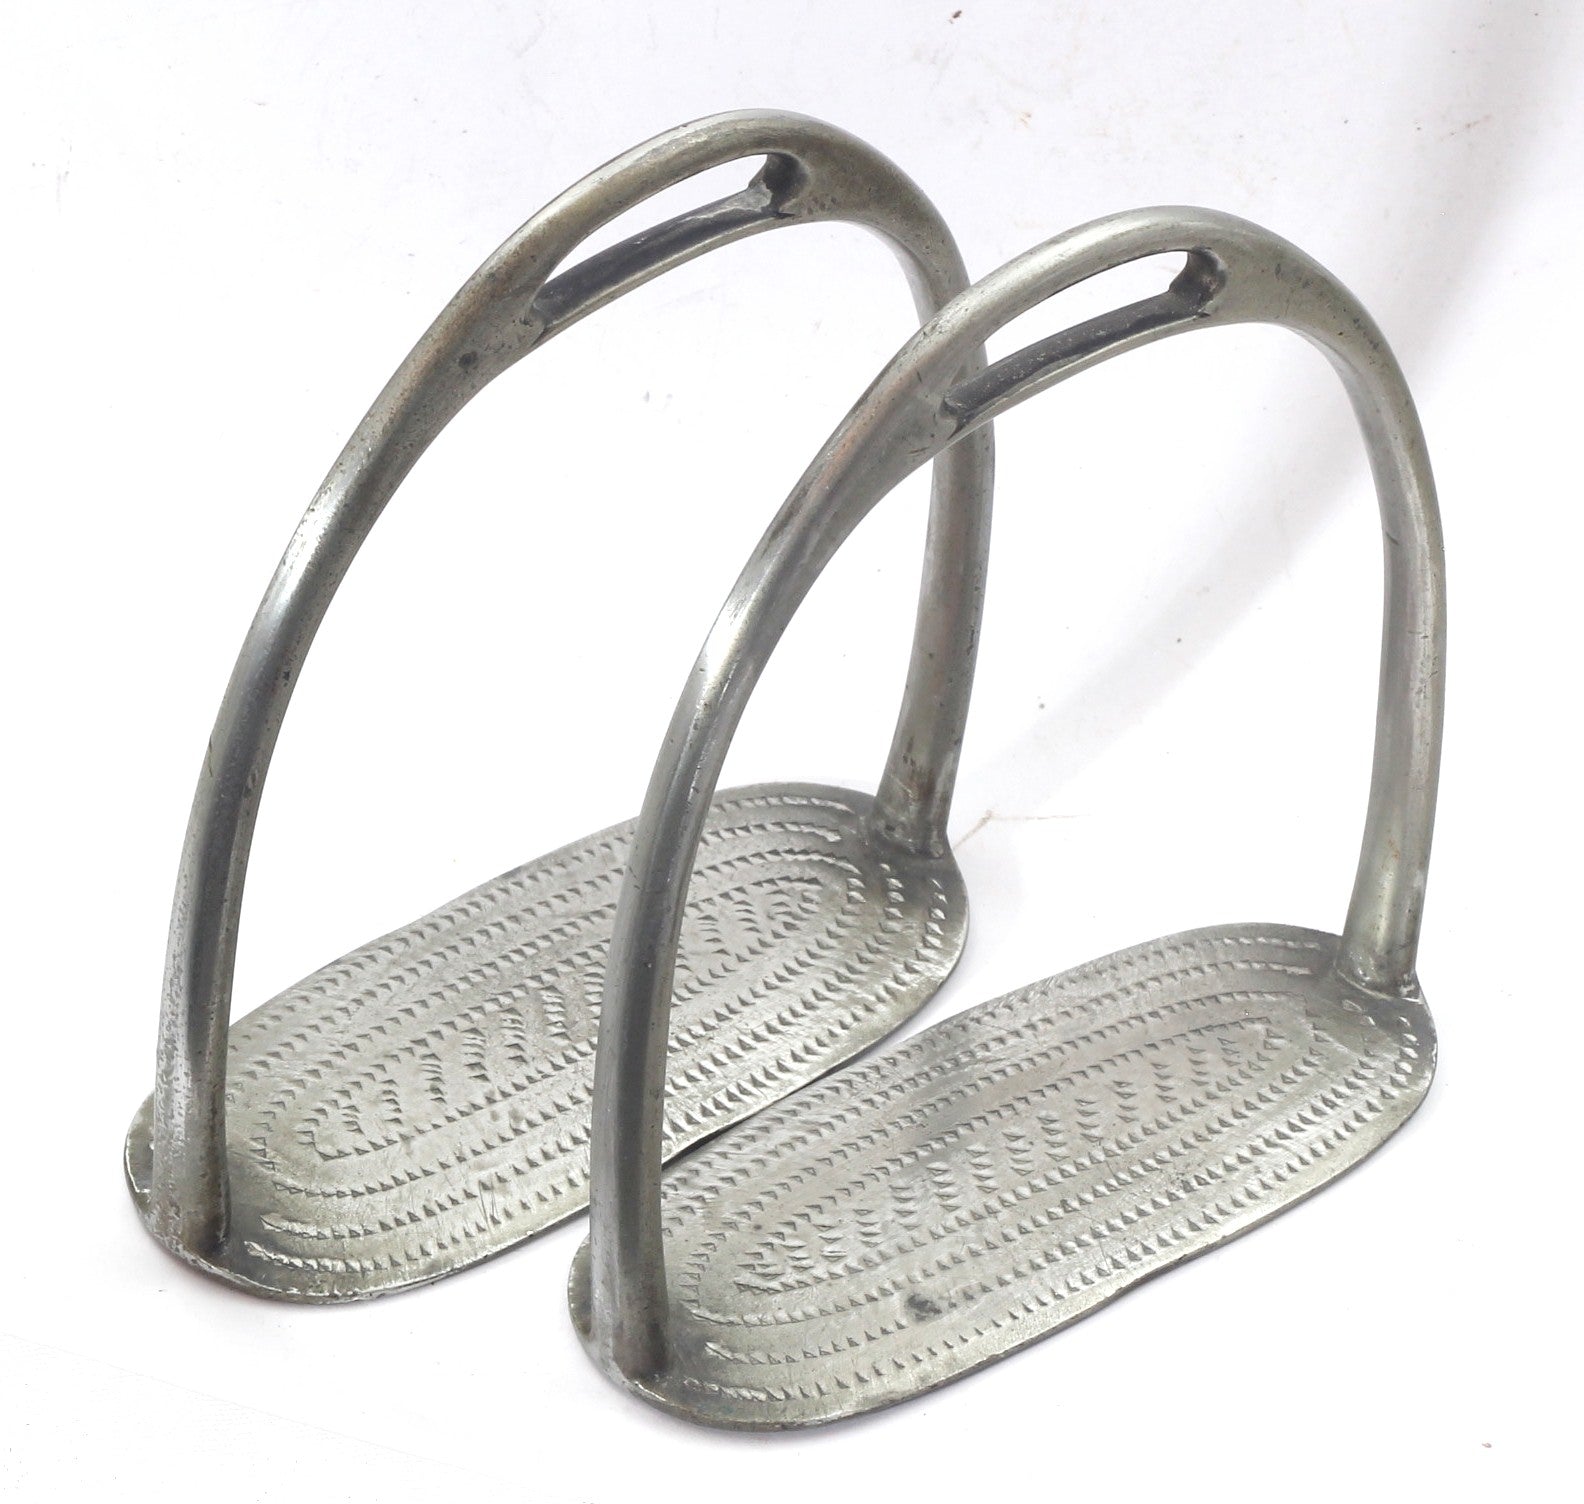 A Pair of Antique Nickel Silver Stirrups